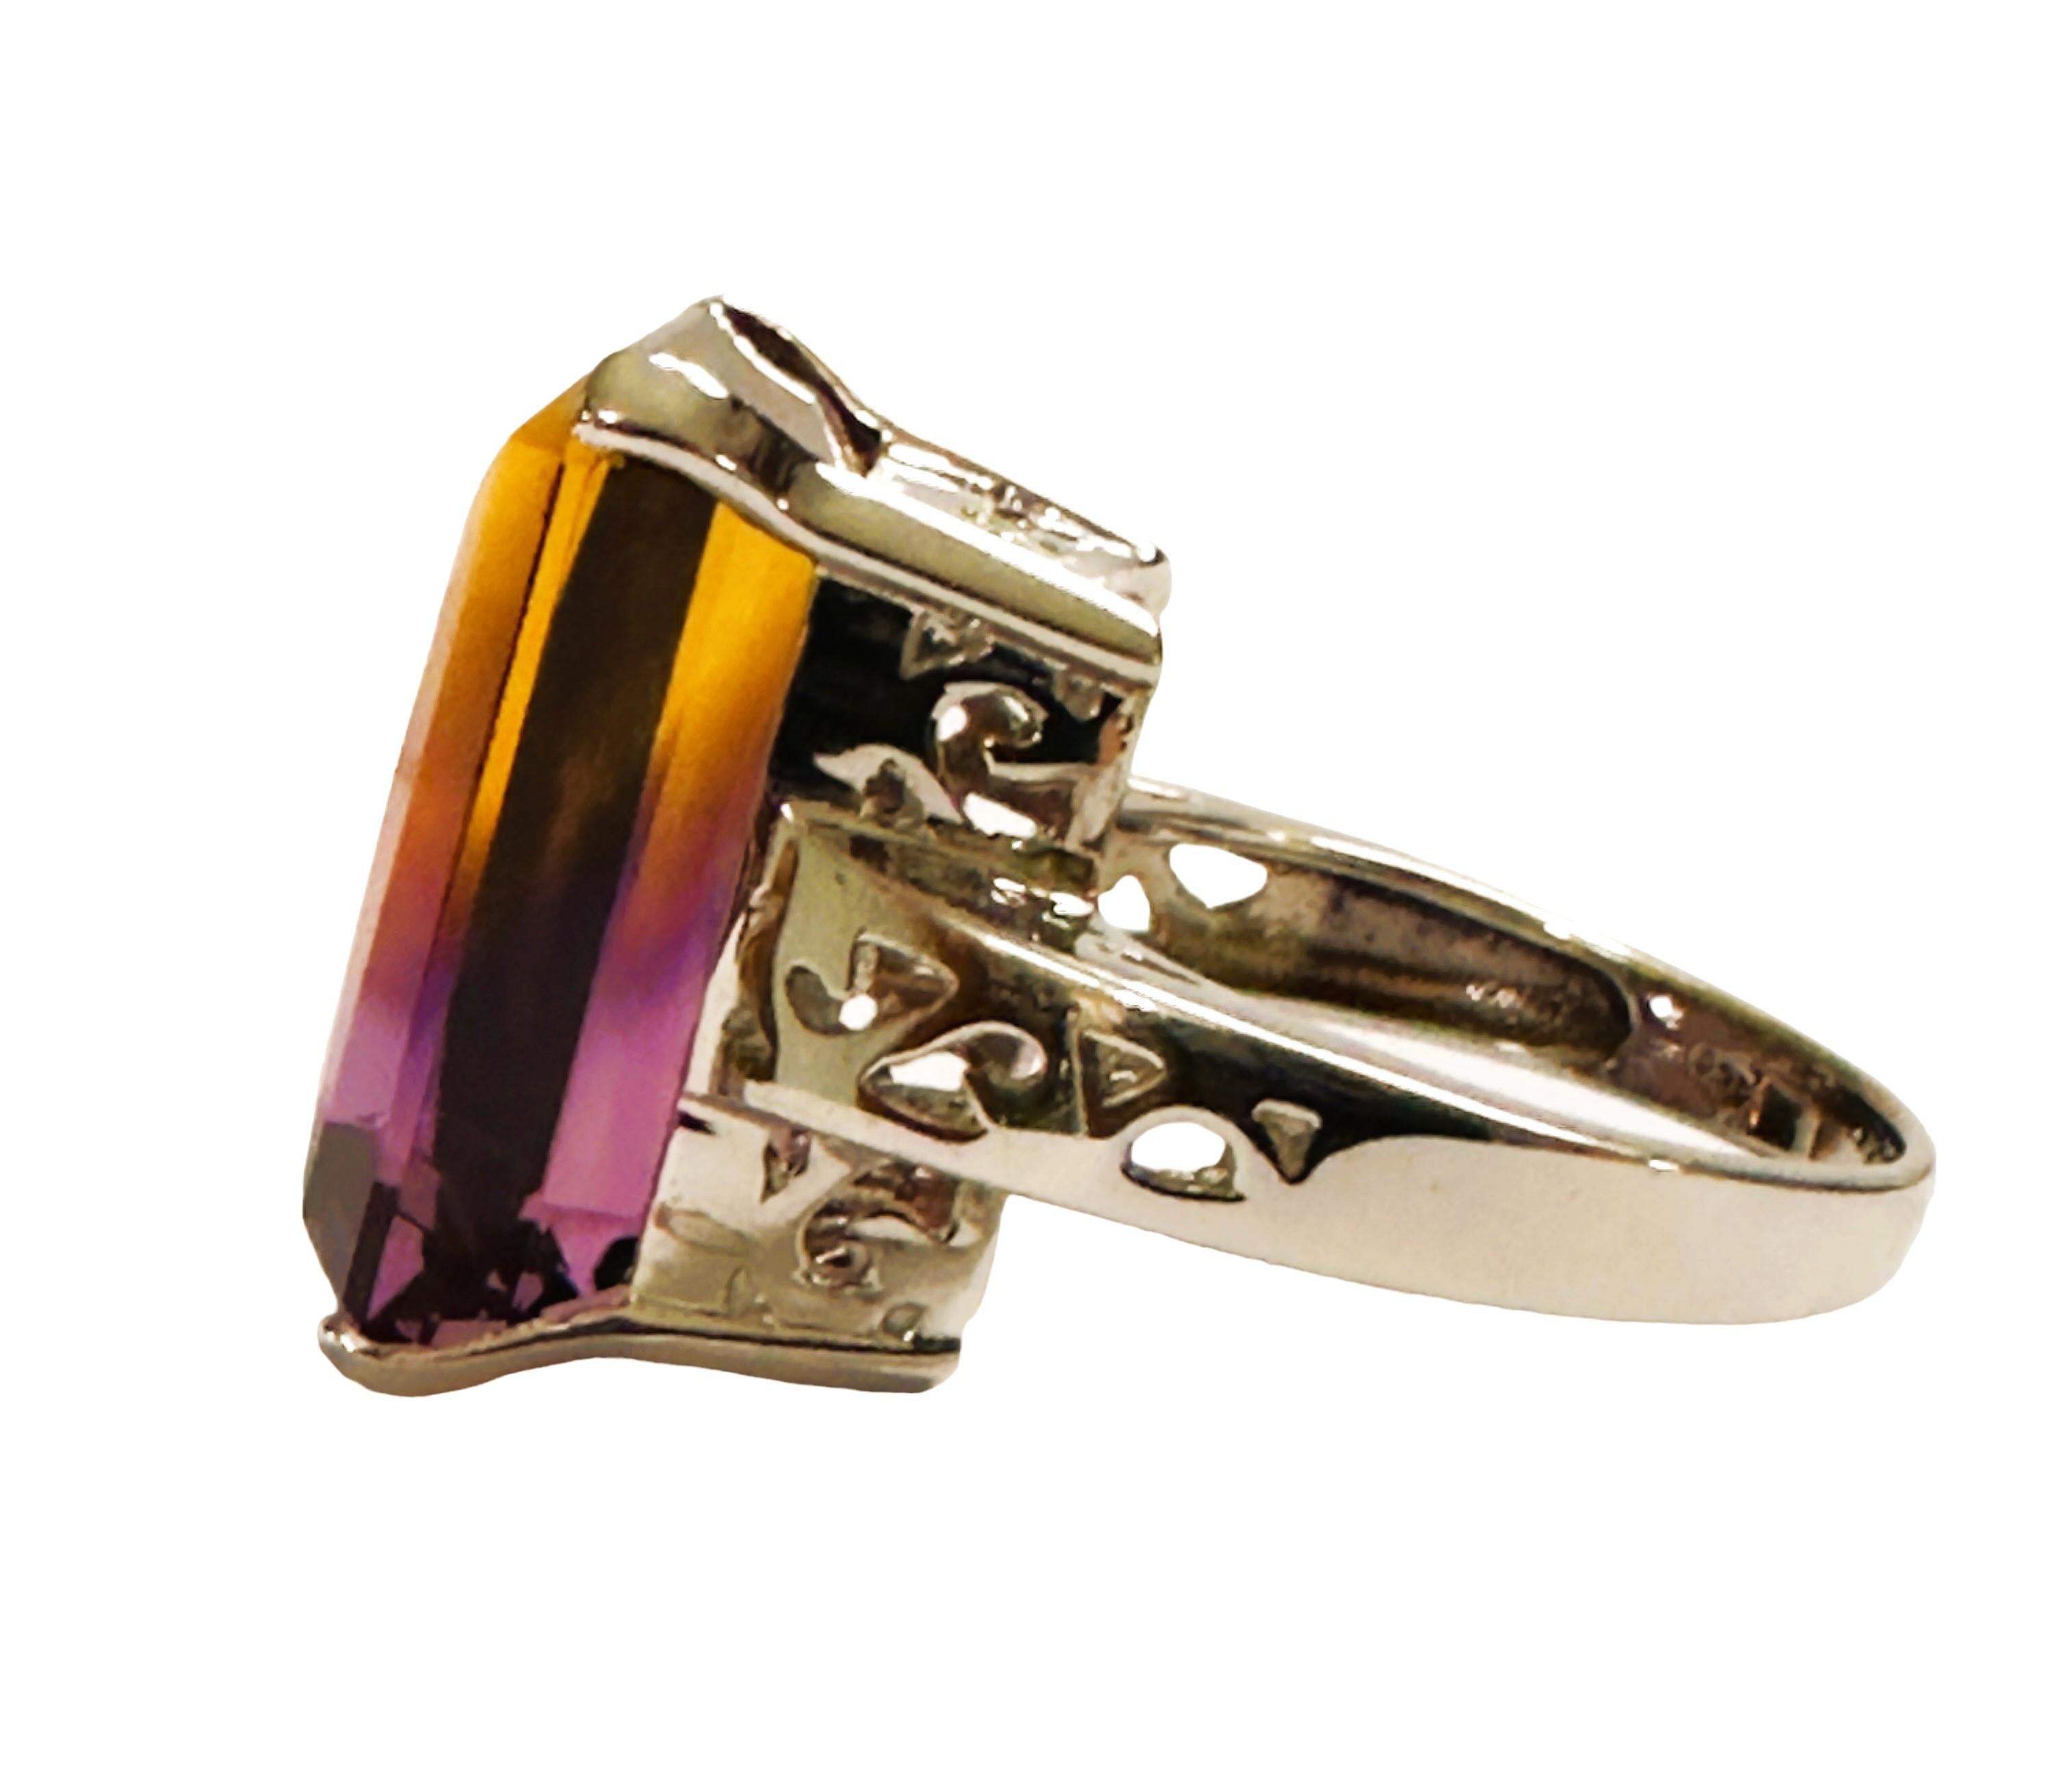 What a gorgeous ring!  It's so cool how you can see the division of the yellow and the purple in the stone.  It is a size 6.75.   It was mined in Brazil and is just exquisite.    A very high quality and rare stone.  The 